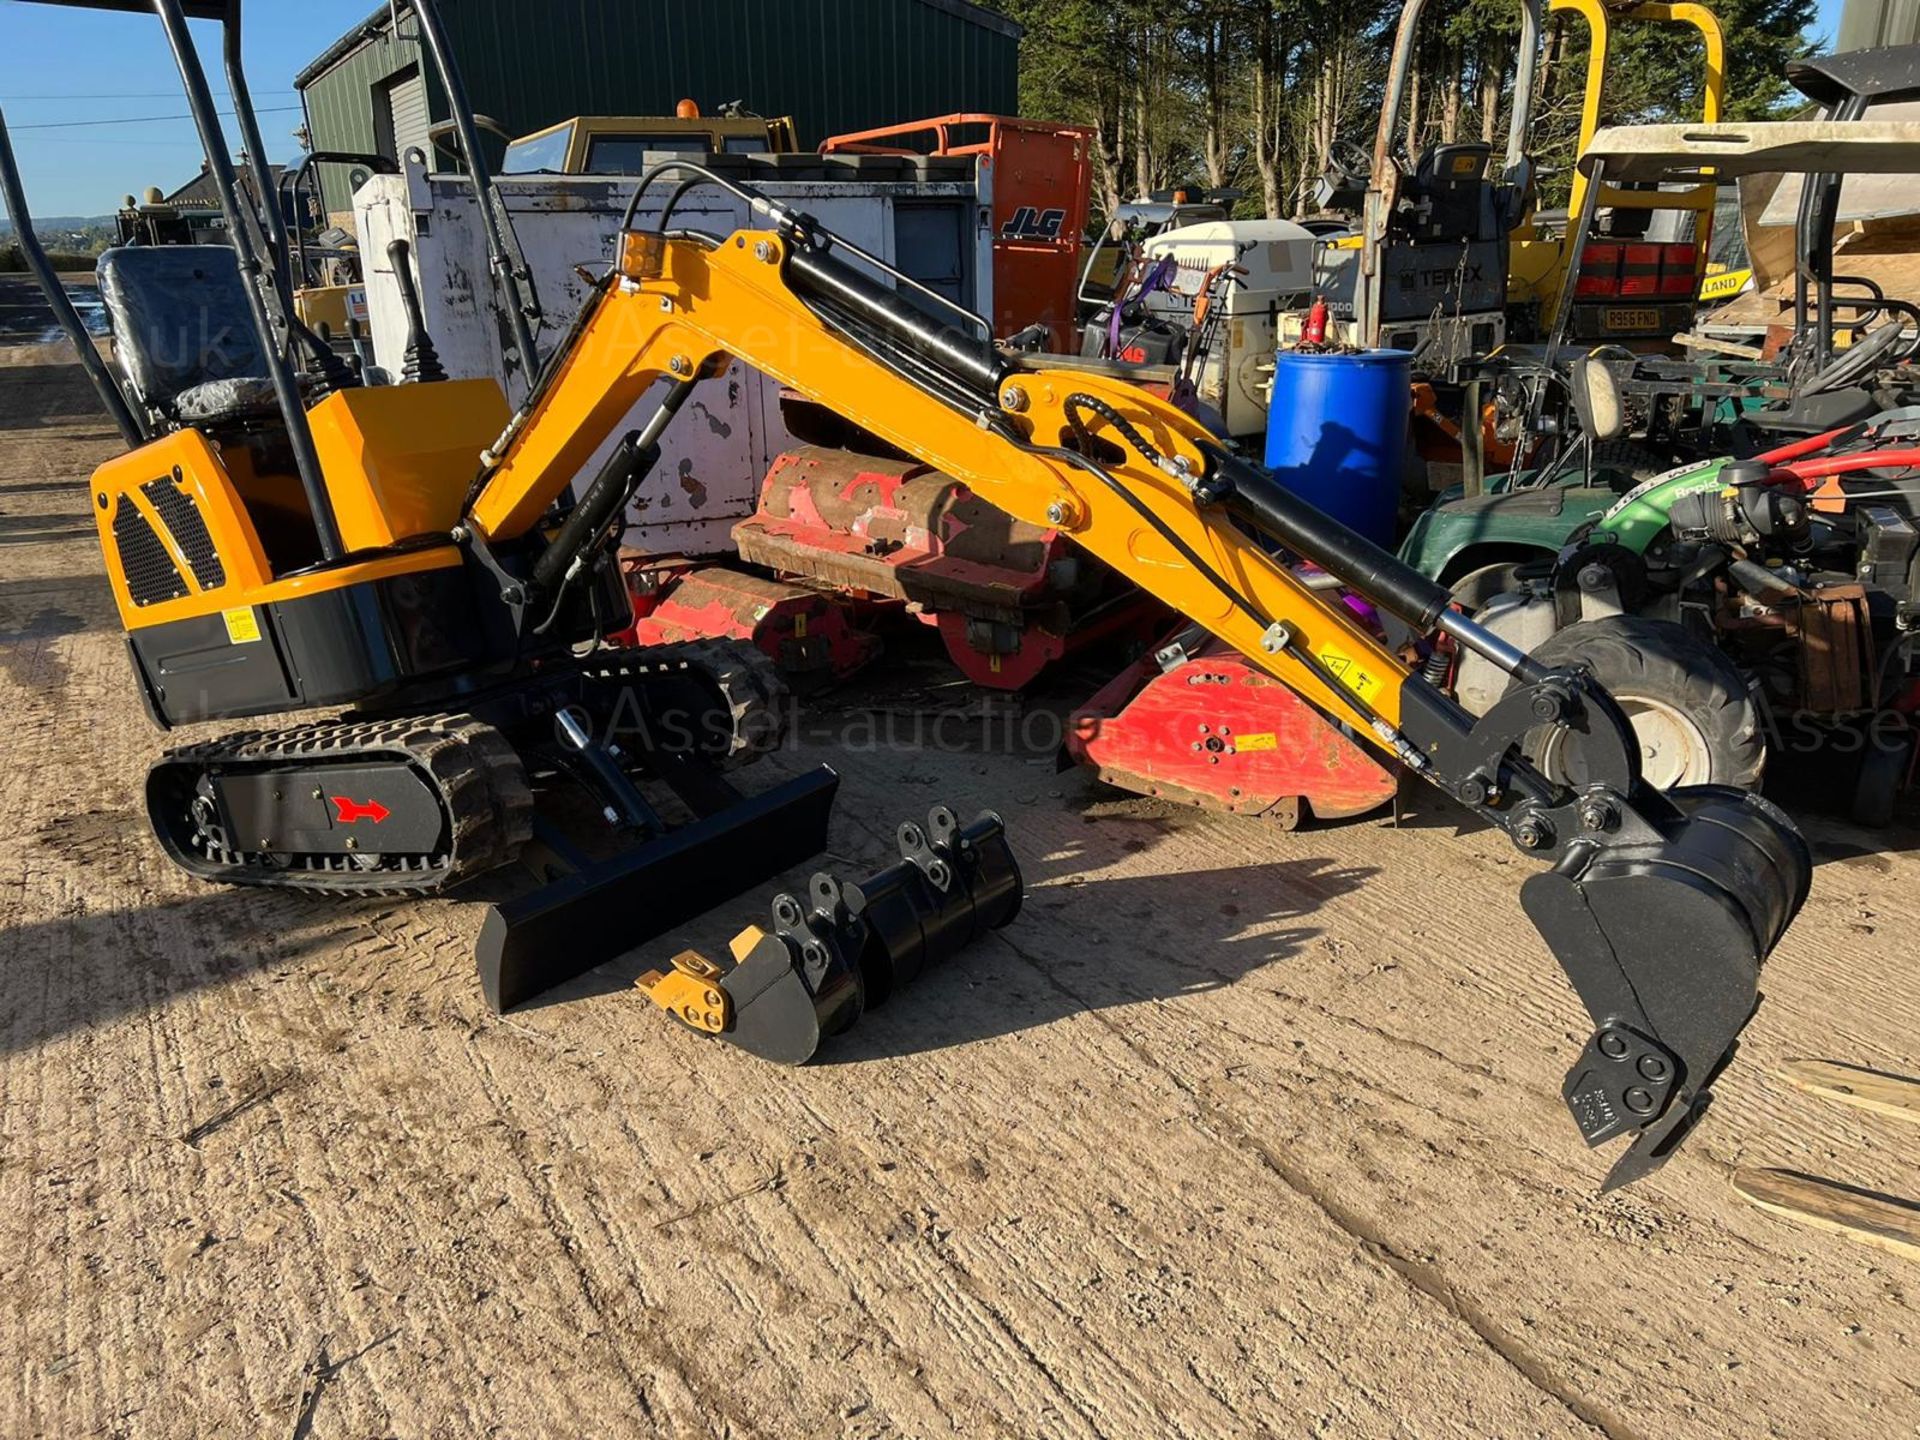 NEW AND UNUSED LM10 YELLOW AND BLACK 1 TON MINI DIGGER, RUNS DRIVES AND DIGS, 3 BUCKETS *PLUS VAT* - Image 5 of 14